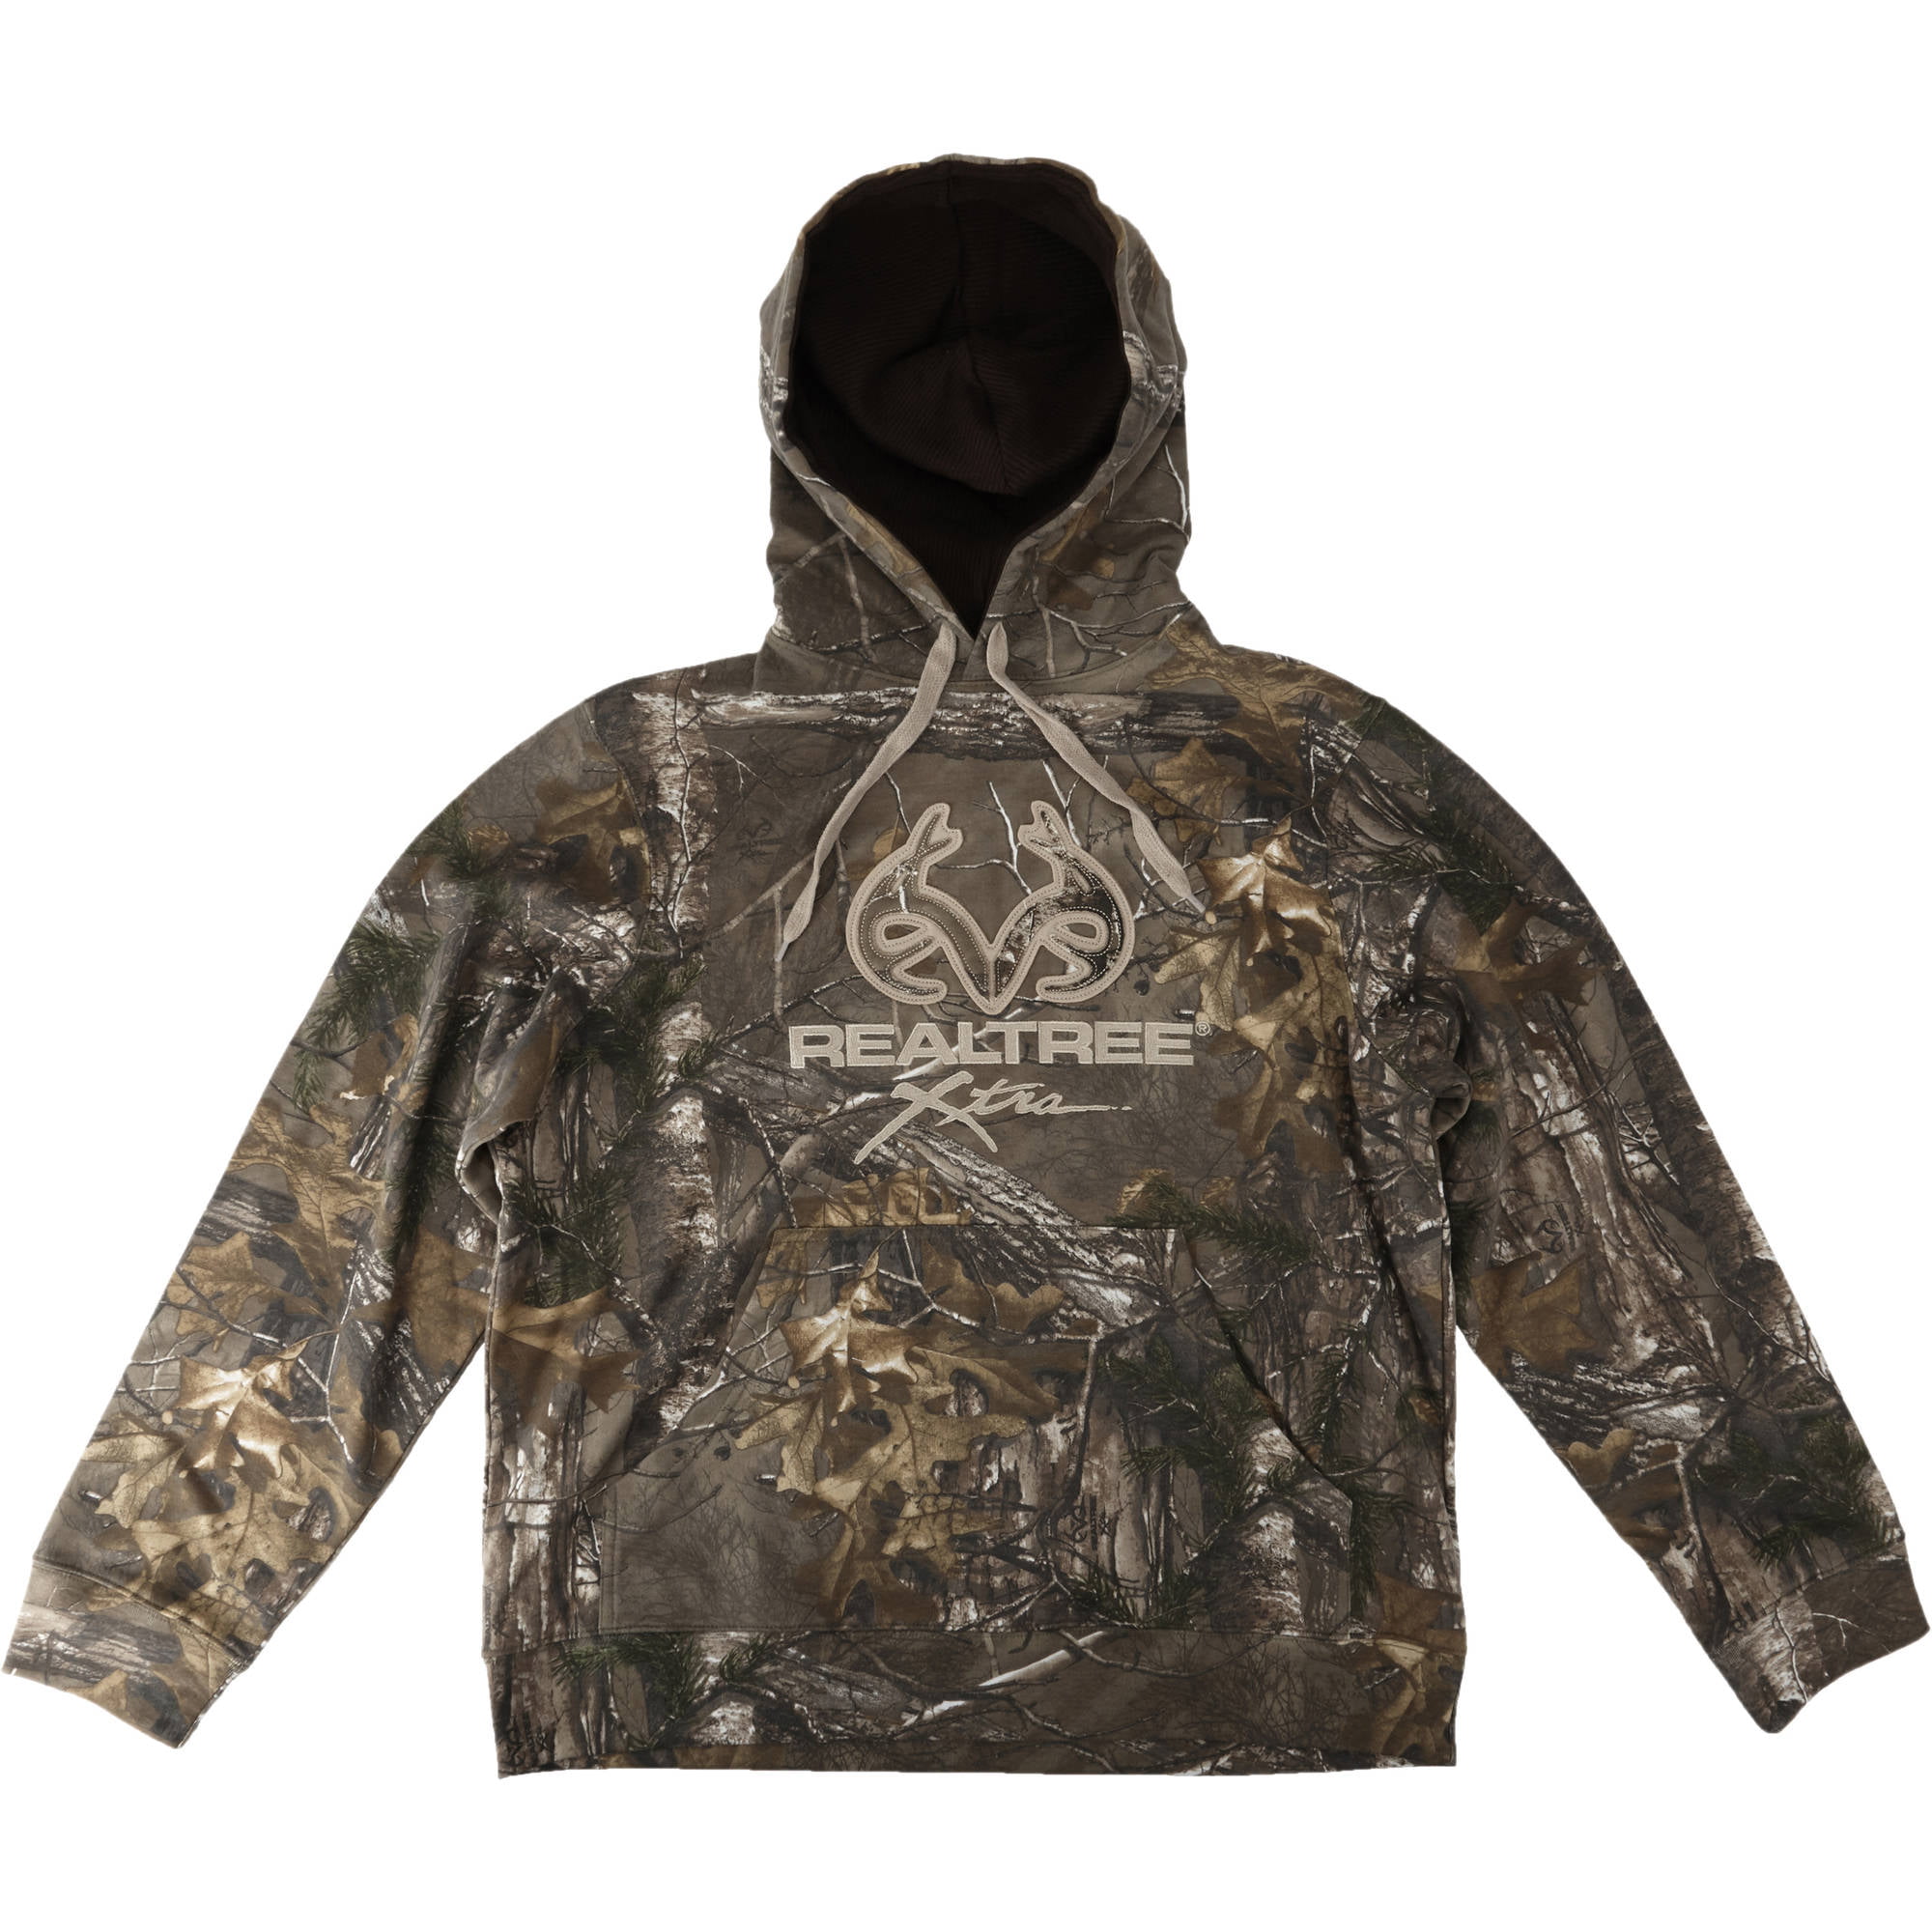 REALTREE AP CAMO XTRA CAMOUFLAGE HOODIE SWEAT SHIRT PULLOVER HOODY HUNT JACKET 